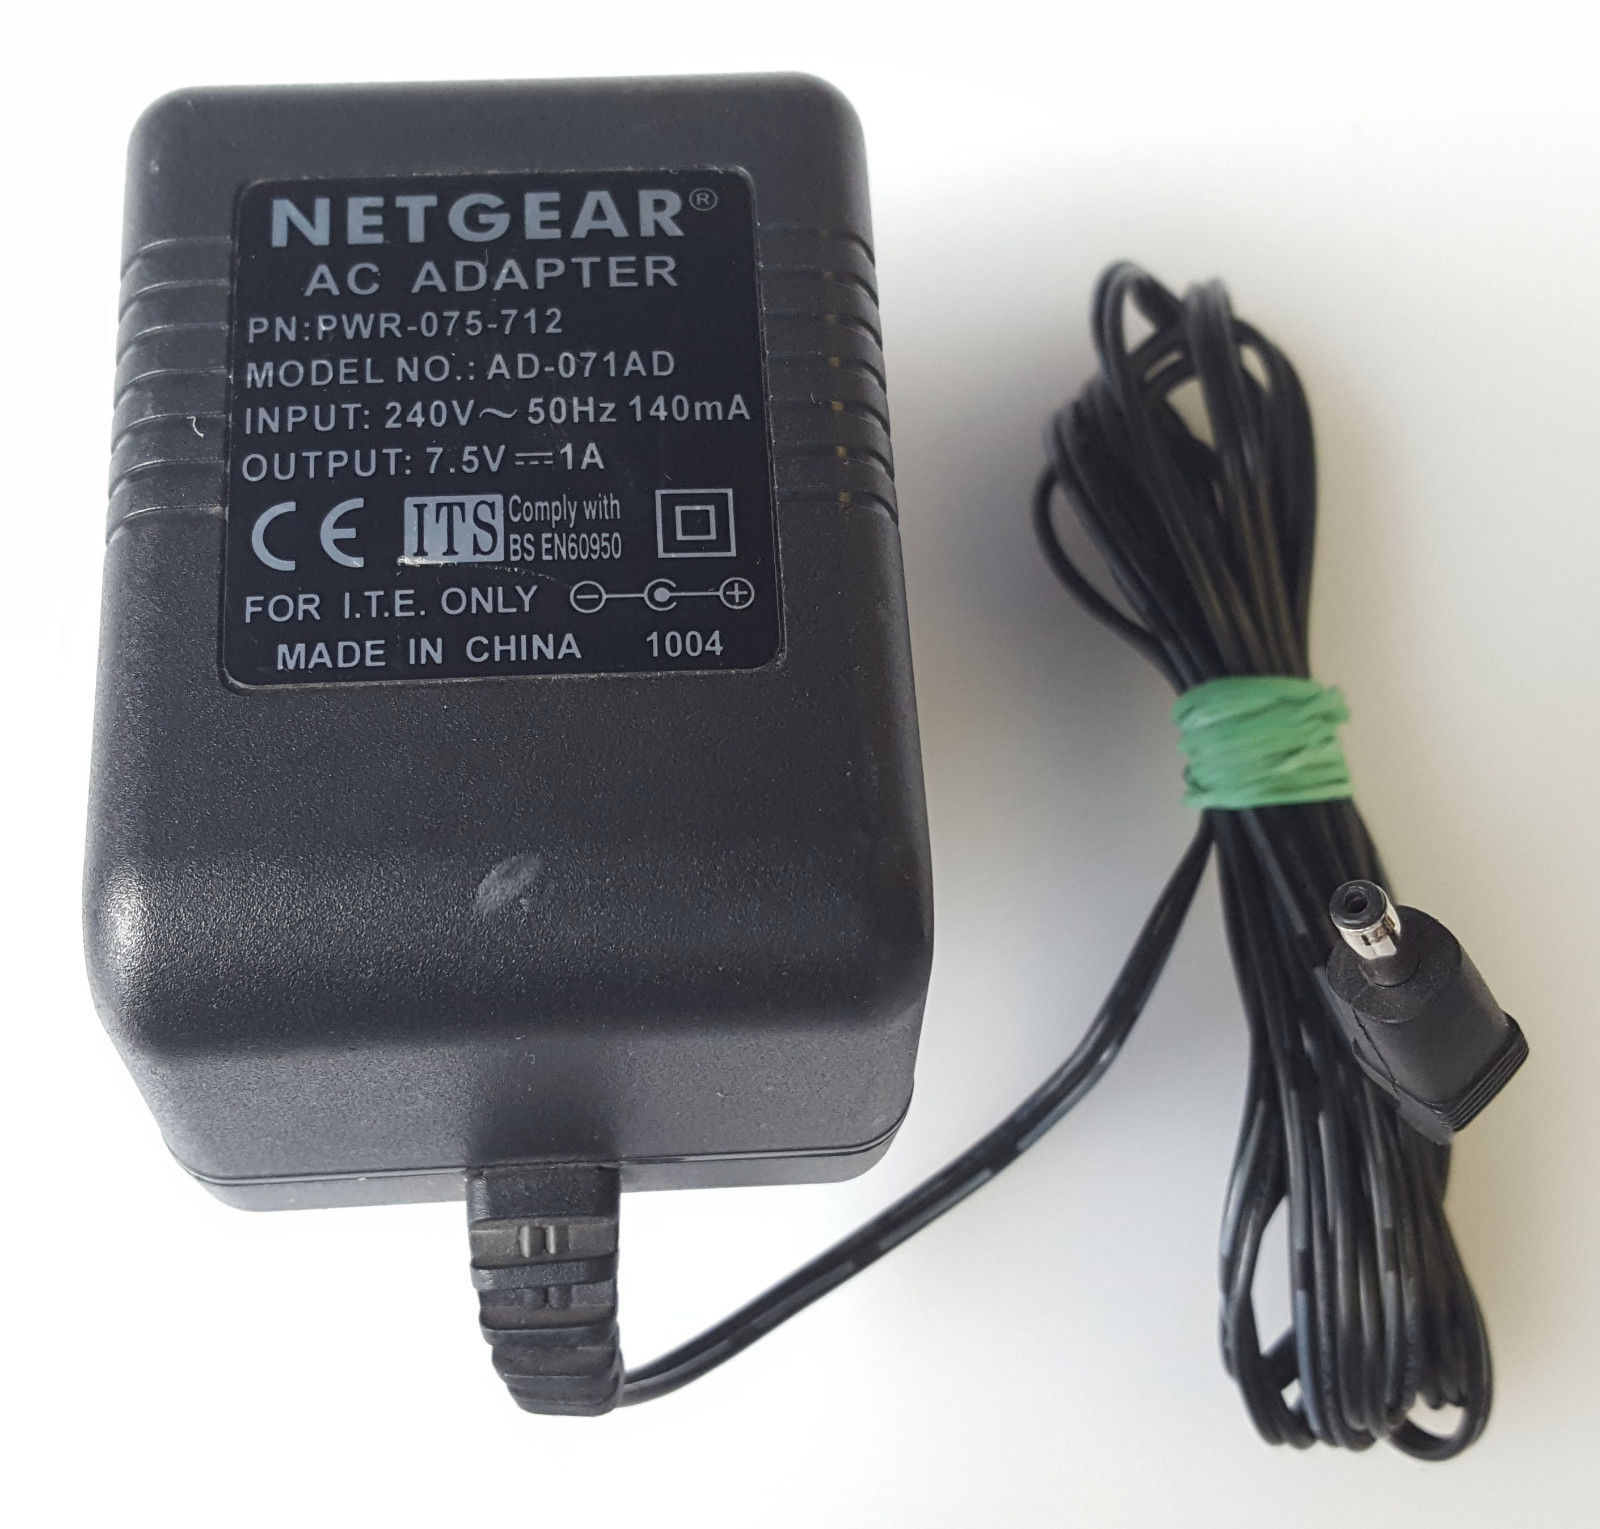 *Brand NEW* NETGEAR AD-071AD PWR-075-712 7.5V 1A AC/DC ADAPTER POWER SUPPLY